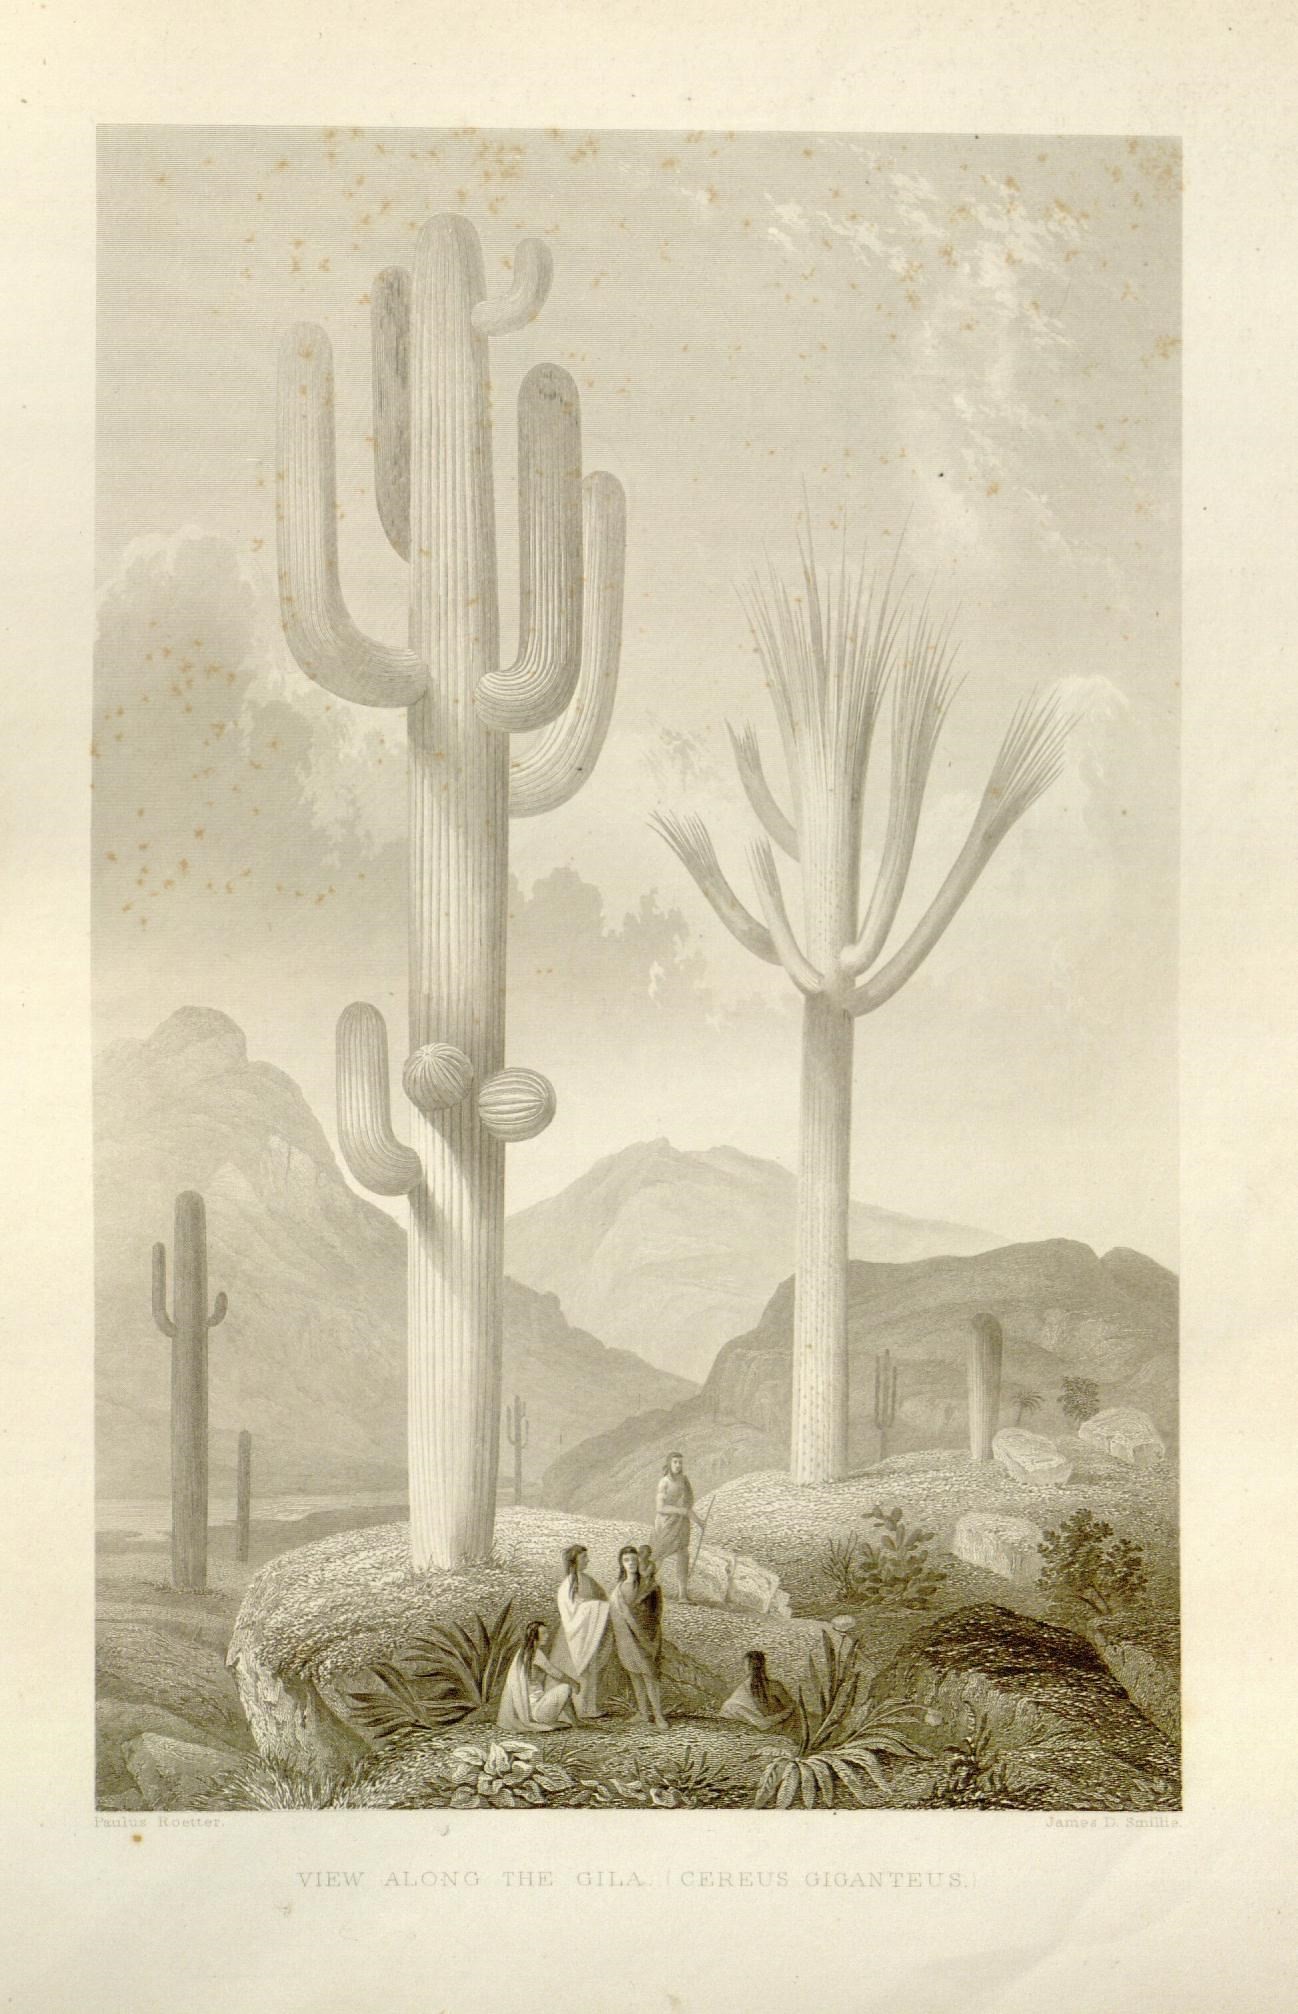 Desert with cactii. View Along the Gila. Cereus Giganteus. The botanical works of the late George Engelmann, collected for Henry Shaw, esq.